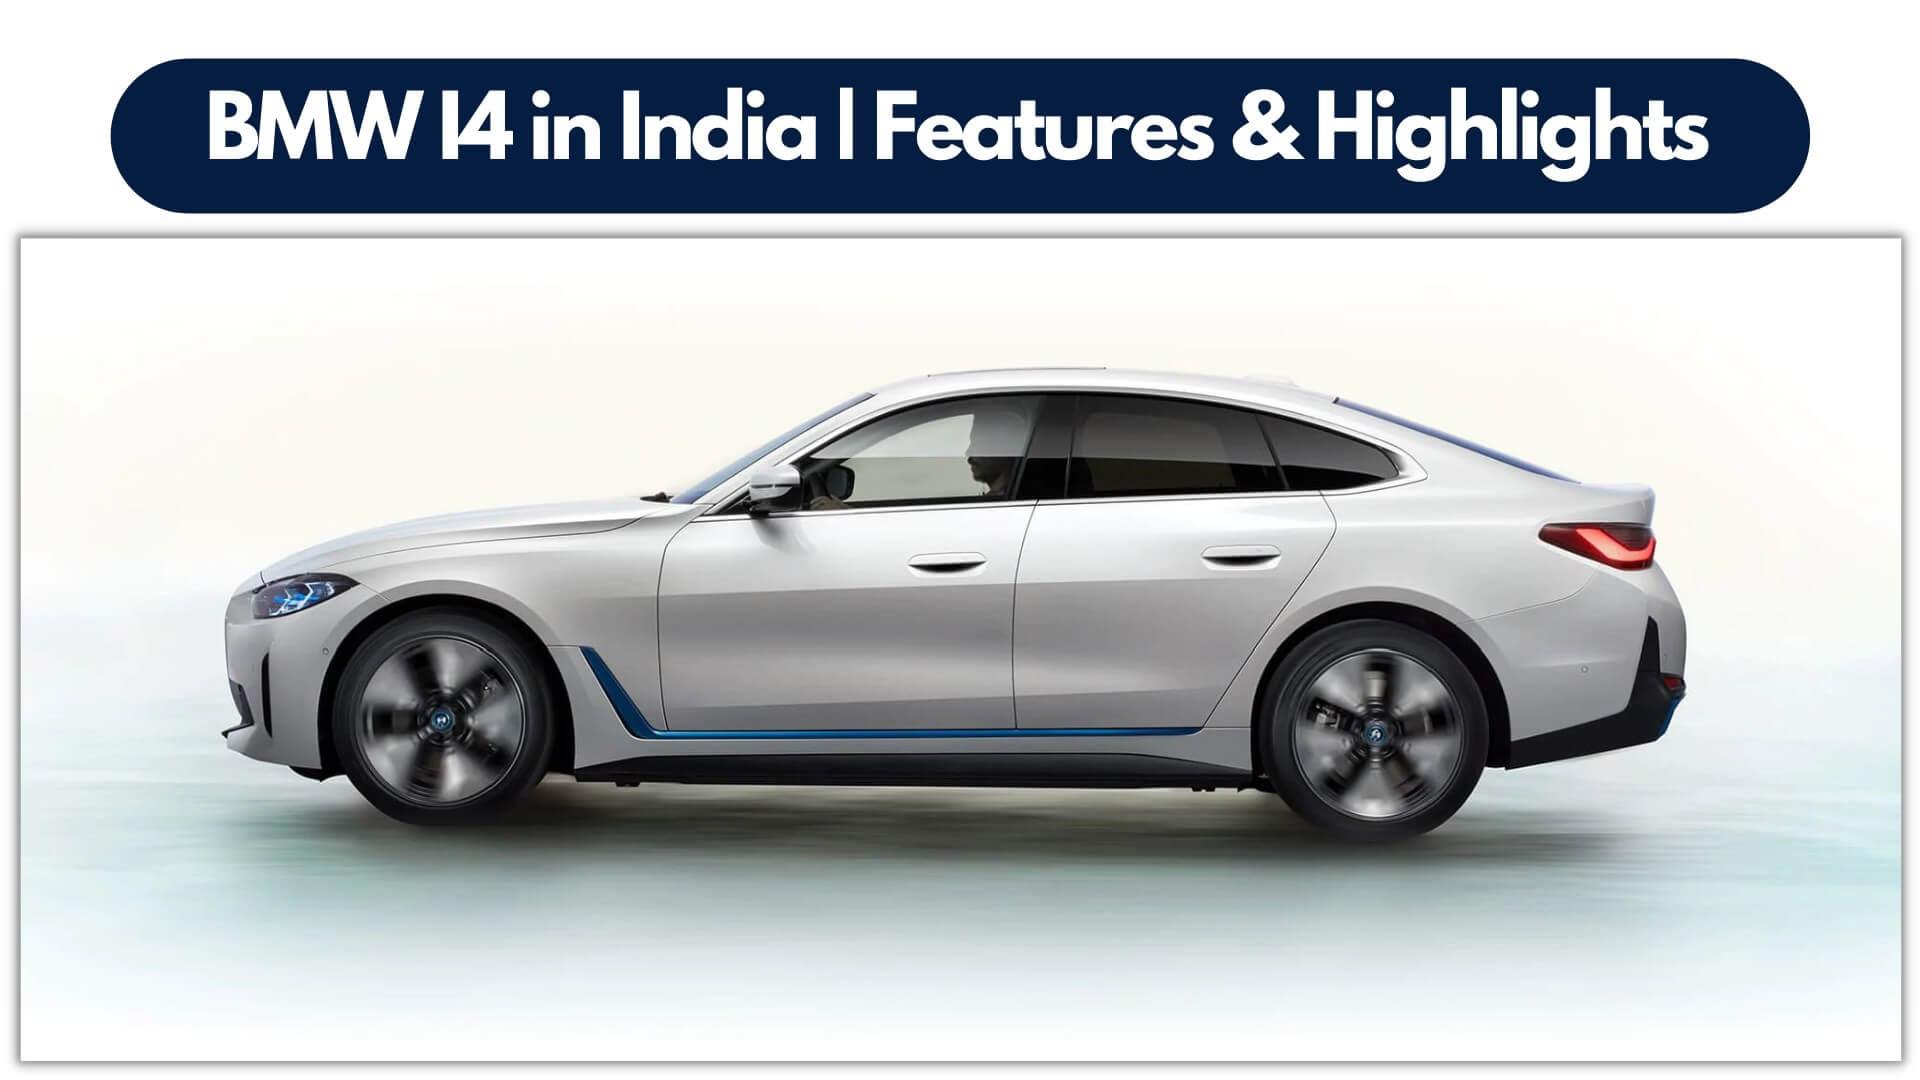 https://e-vehicleinfo.com/bmw-i4-price-in-india-bmw-i4-features-highlights/